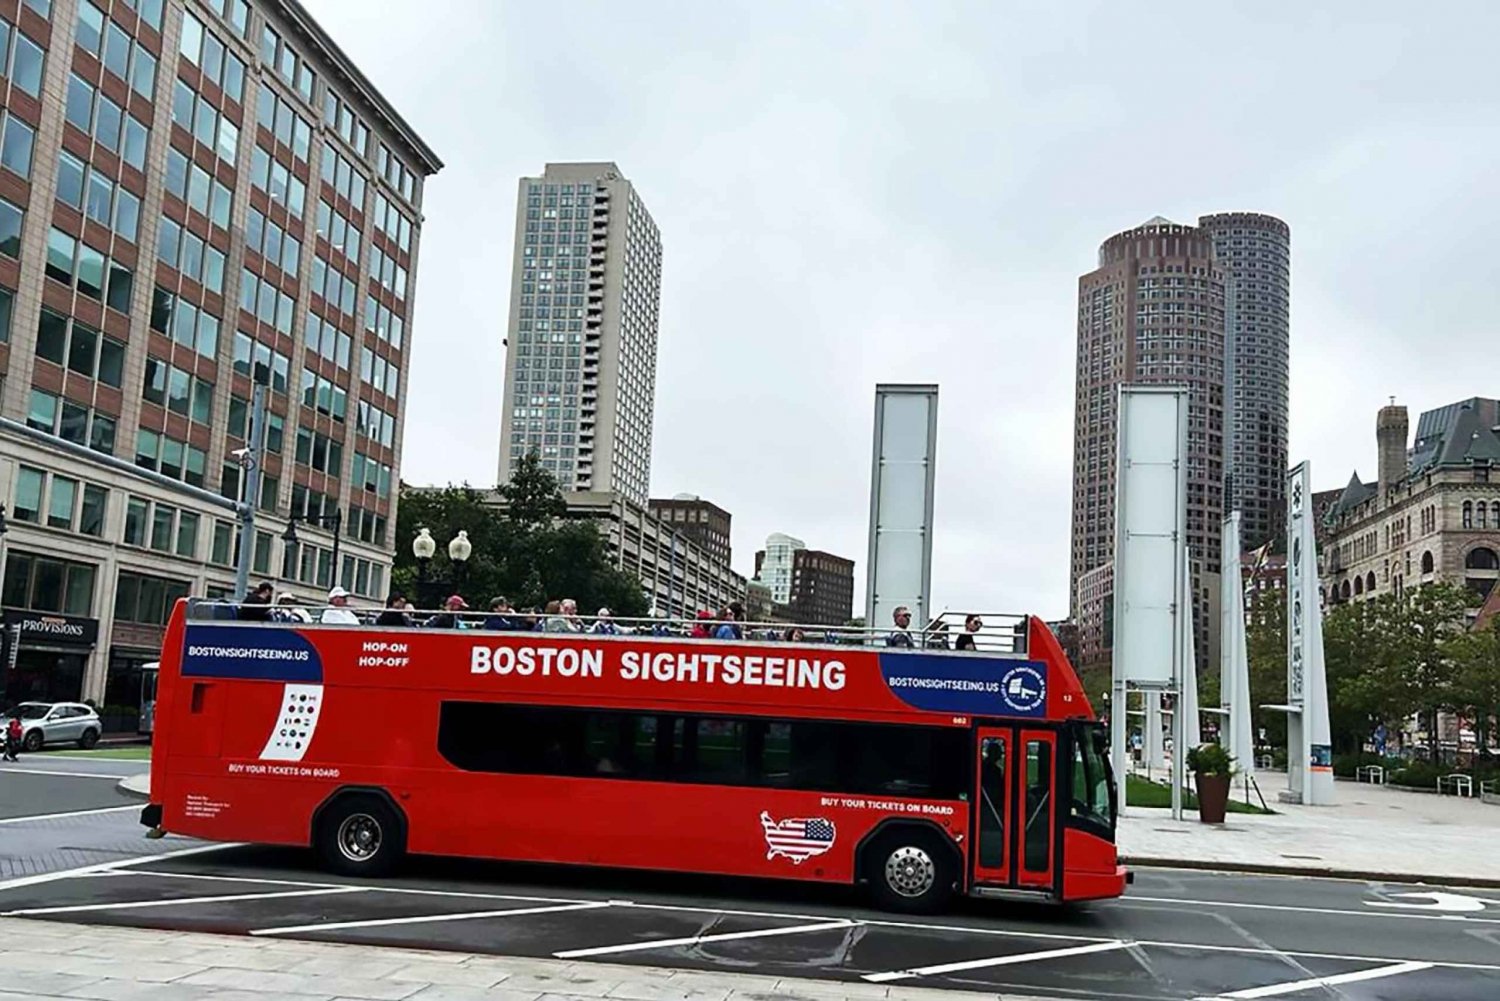 Boston: Hop-On Hop-Off All Day Boston Sightseeing Tour